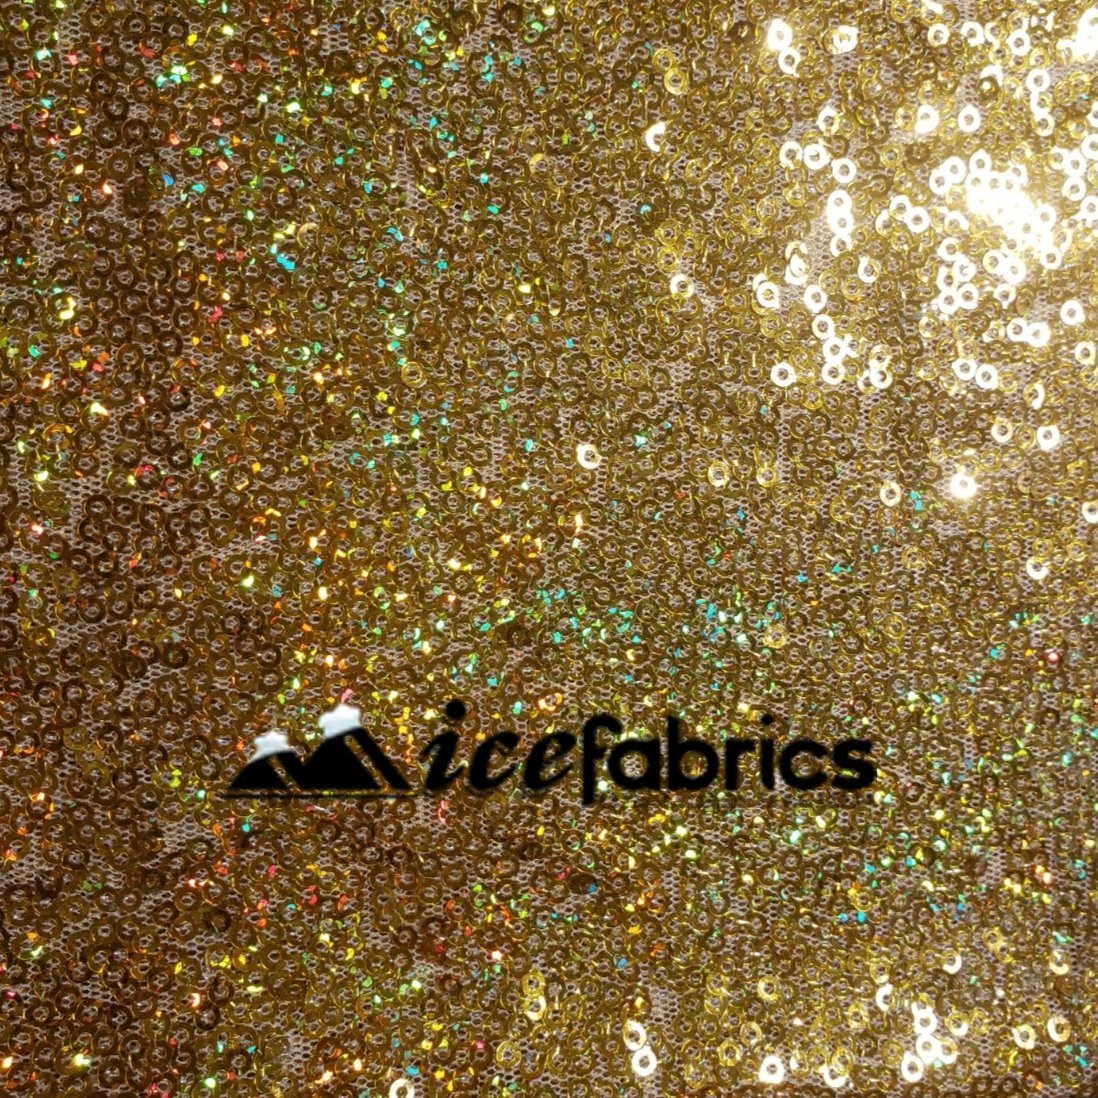 Luxurious Mesh Glitz Sequin Fabric By The Roll (20 yards) Fabric WholesaleICE FABRICSICE FABRICSGold HolographicBy The Roll (60" Wide)Luxurious Mesh Glitz Sequin Fabric By The Roll (20 yards) Fabric Wholesale ICE FABRICS Gold Holographic